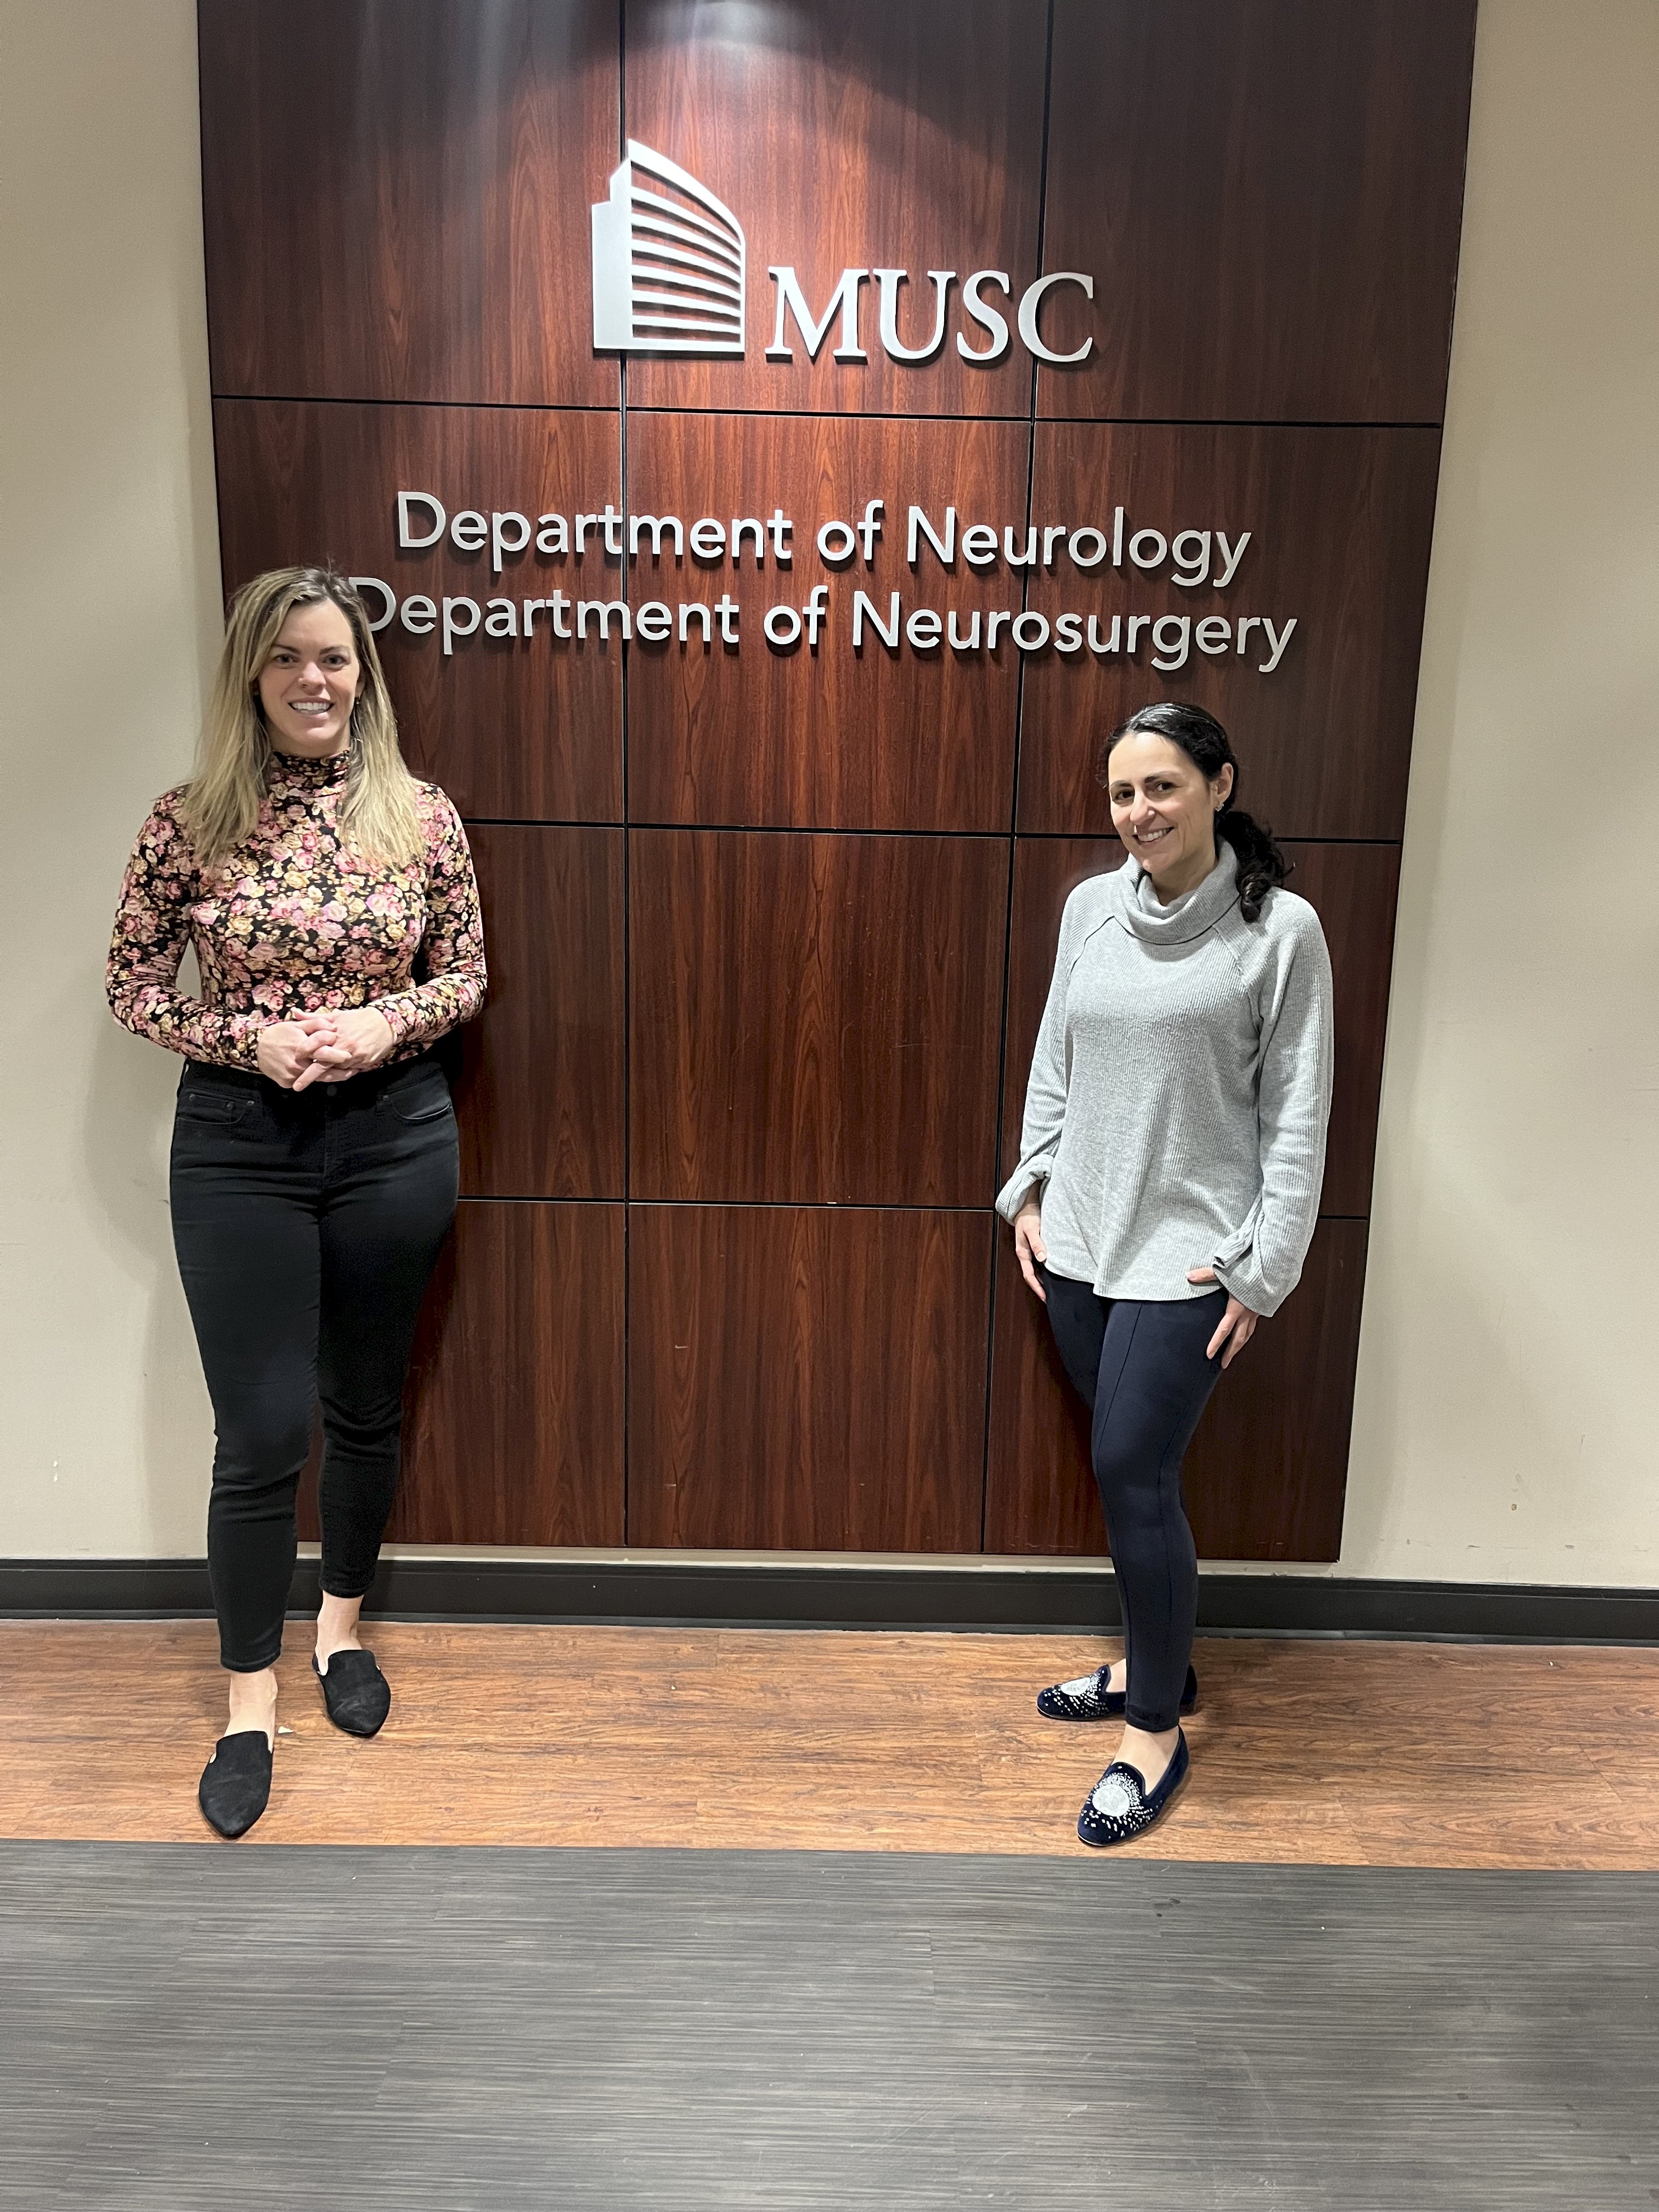 Photo shows two people in front of a wooden sign annoucing the MUSC department of neurology  and department of neurosurgery